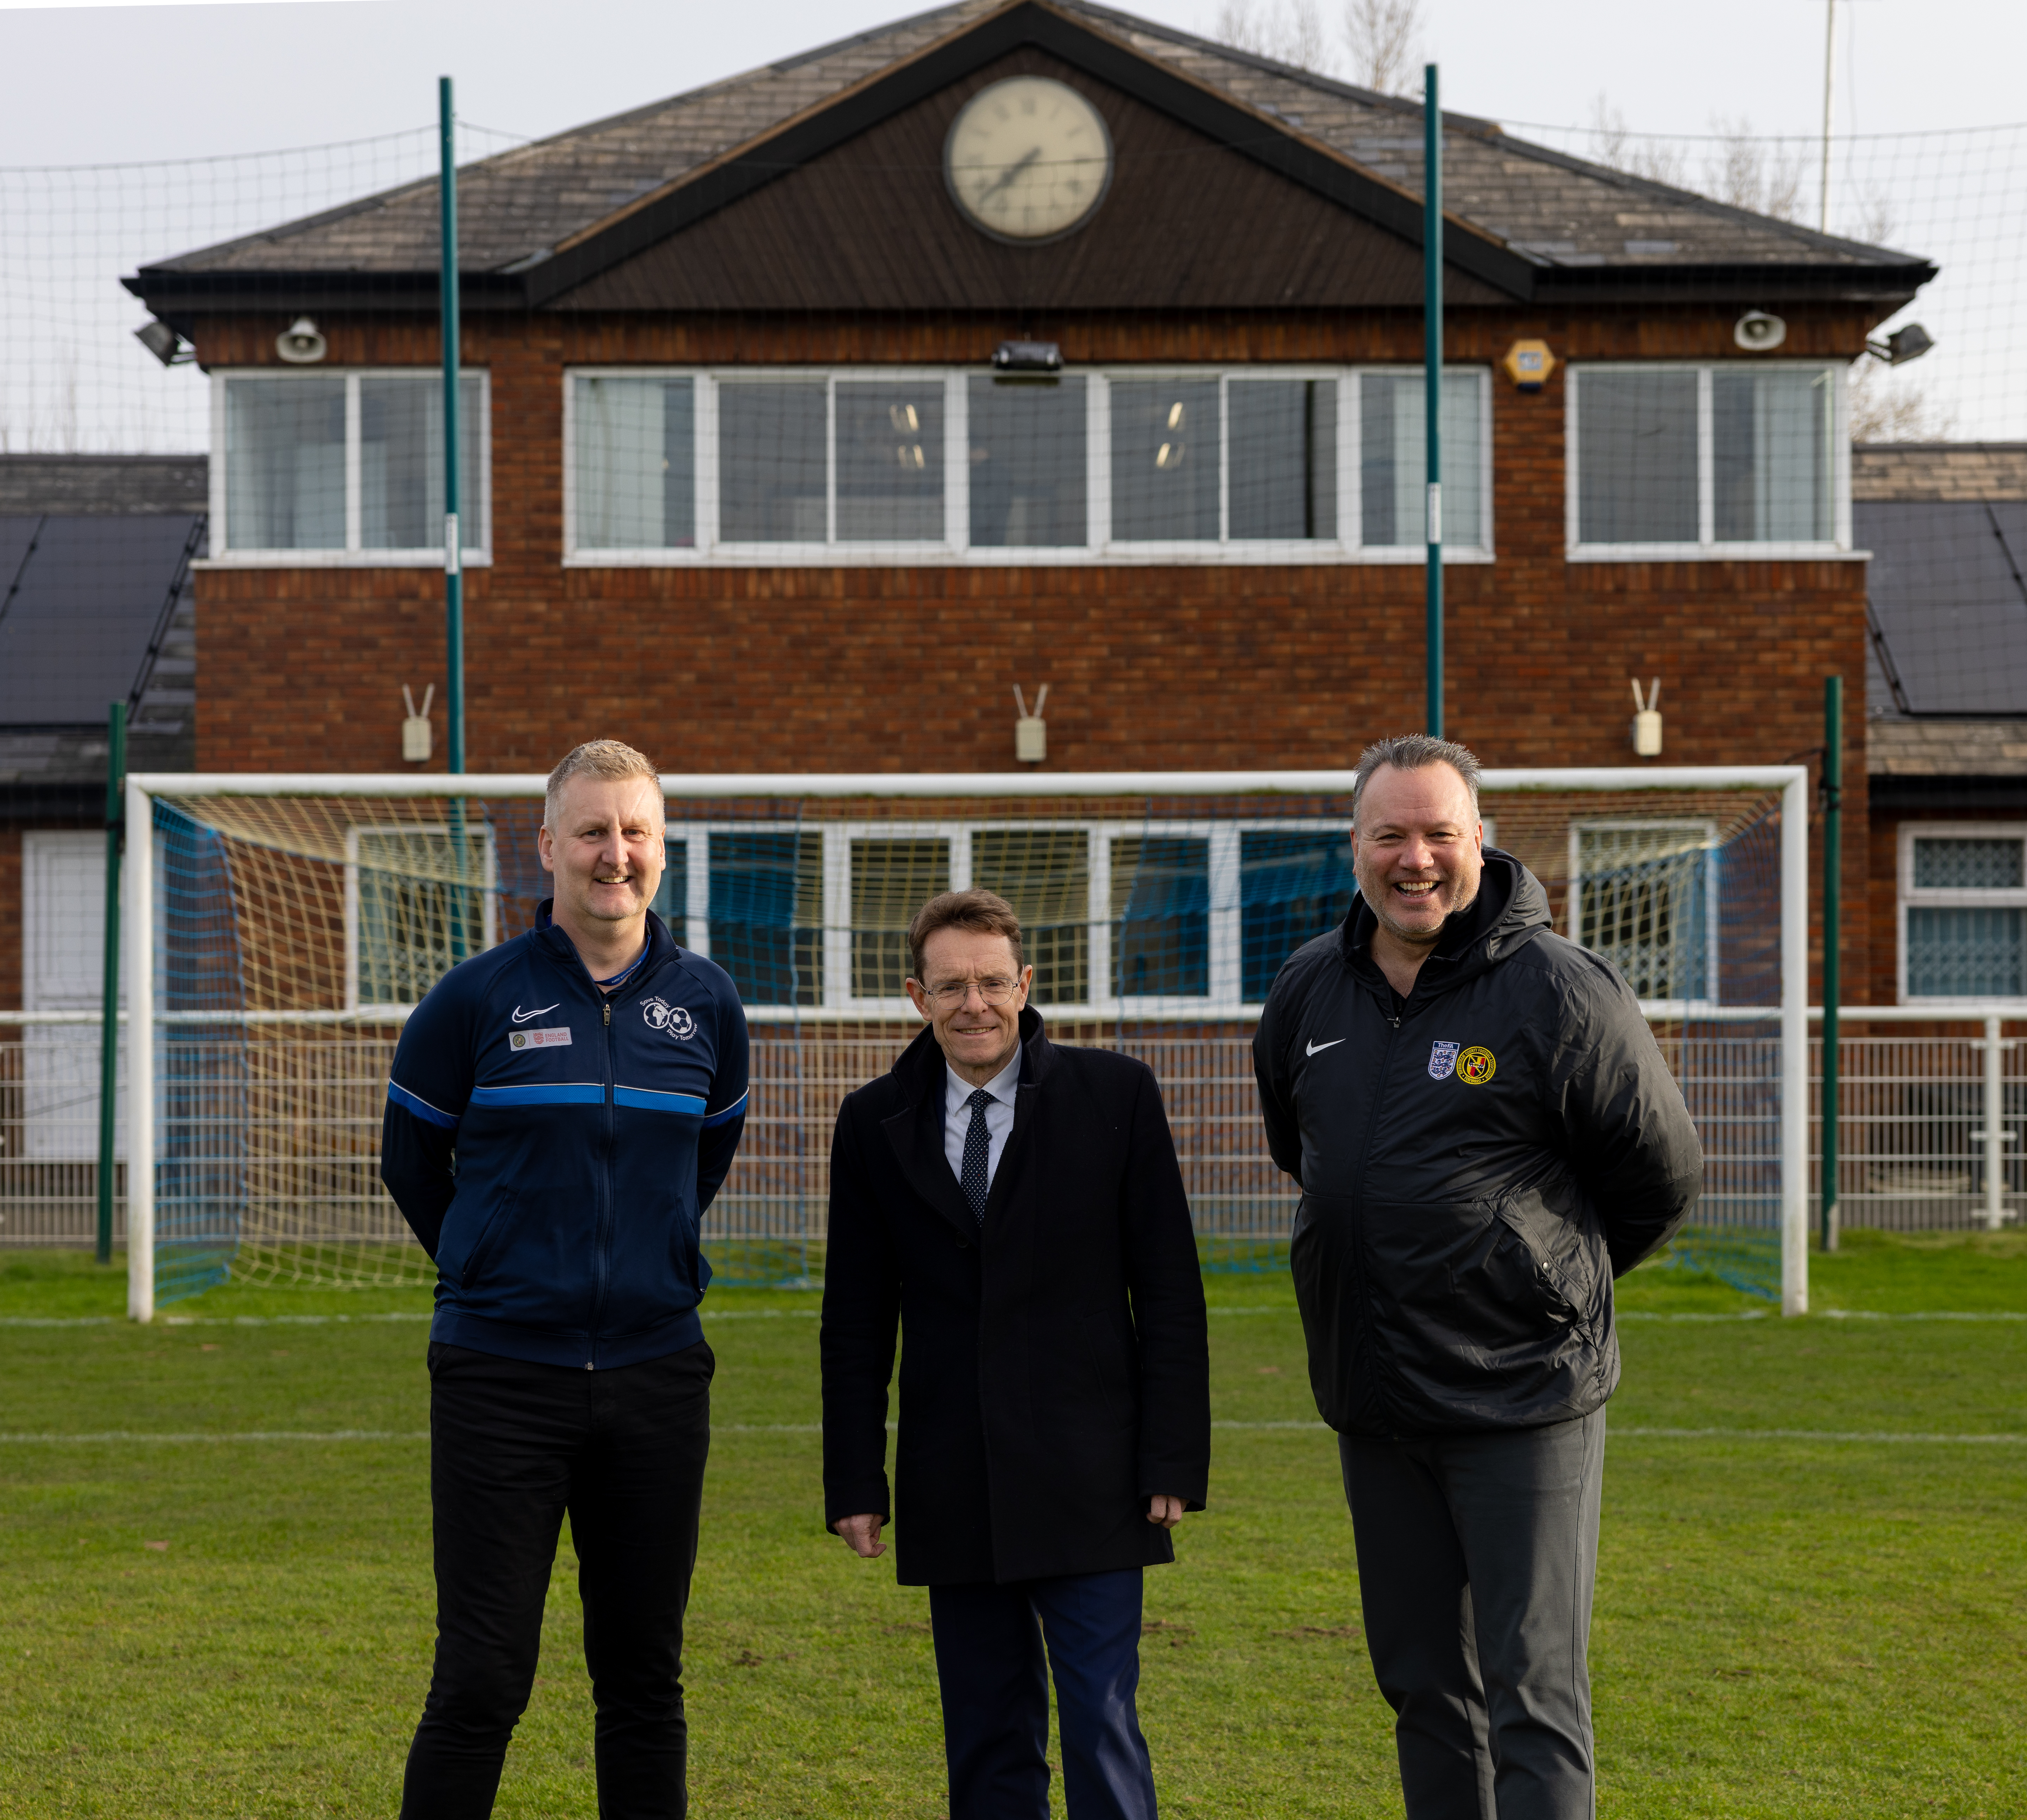 Andy Street, Mayor of the West Midlands and chair of the WMCA, with Richard Lindsay, sustainability and business insights manager, and Kevin Shoemake, chief executive, at Birmingham County FA which has been given £25,000 for its Save Today, Play Tomorrow Carbon Literacy for Grassroots Football project.